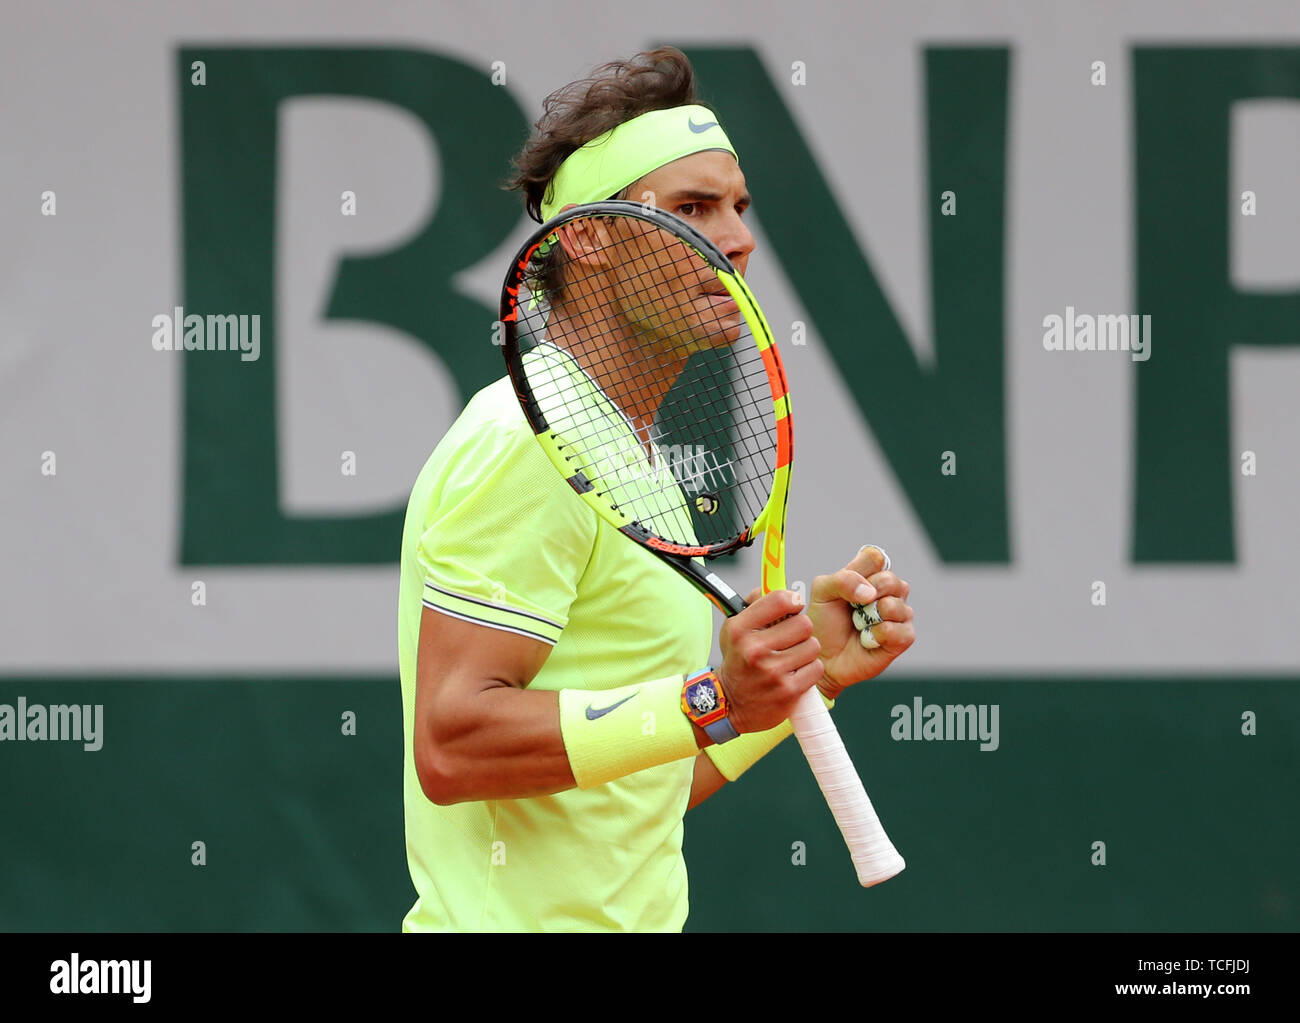 Rafael Nadal during the Men's Semi Final of the French Open at Roland Garros, Paris. Stock Photo